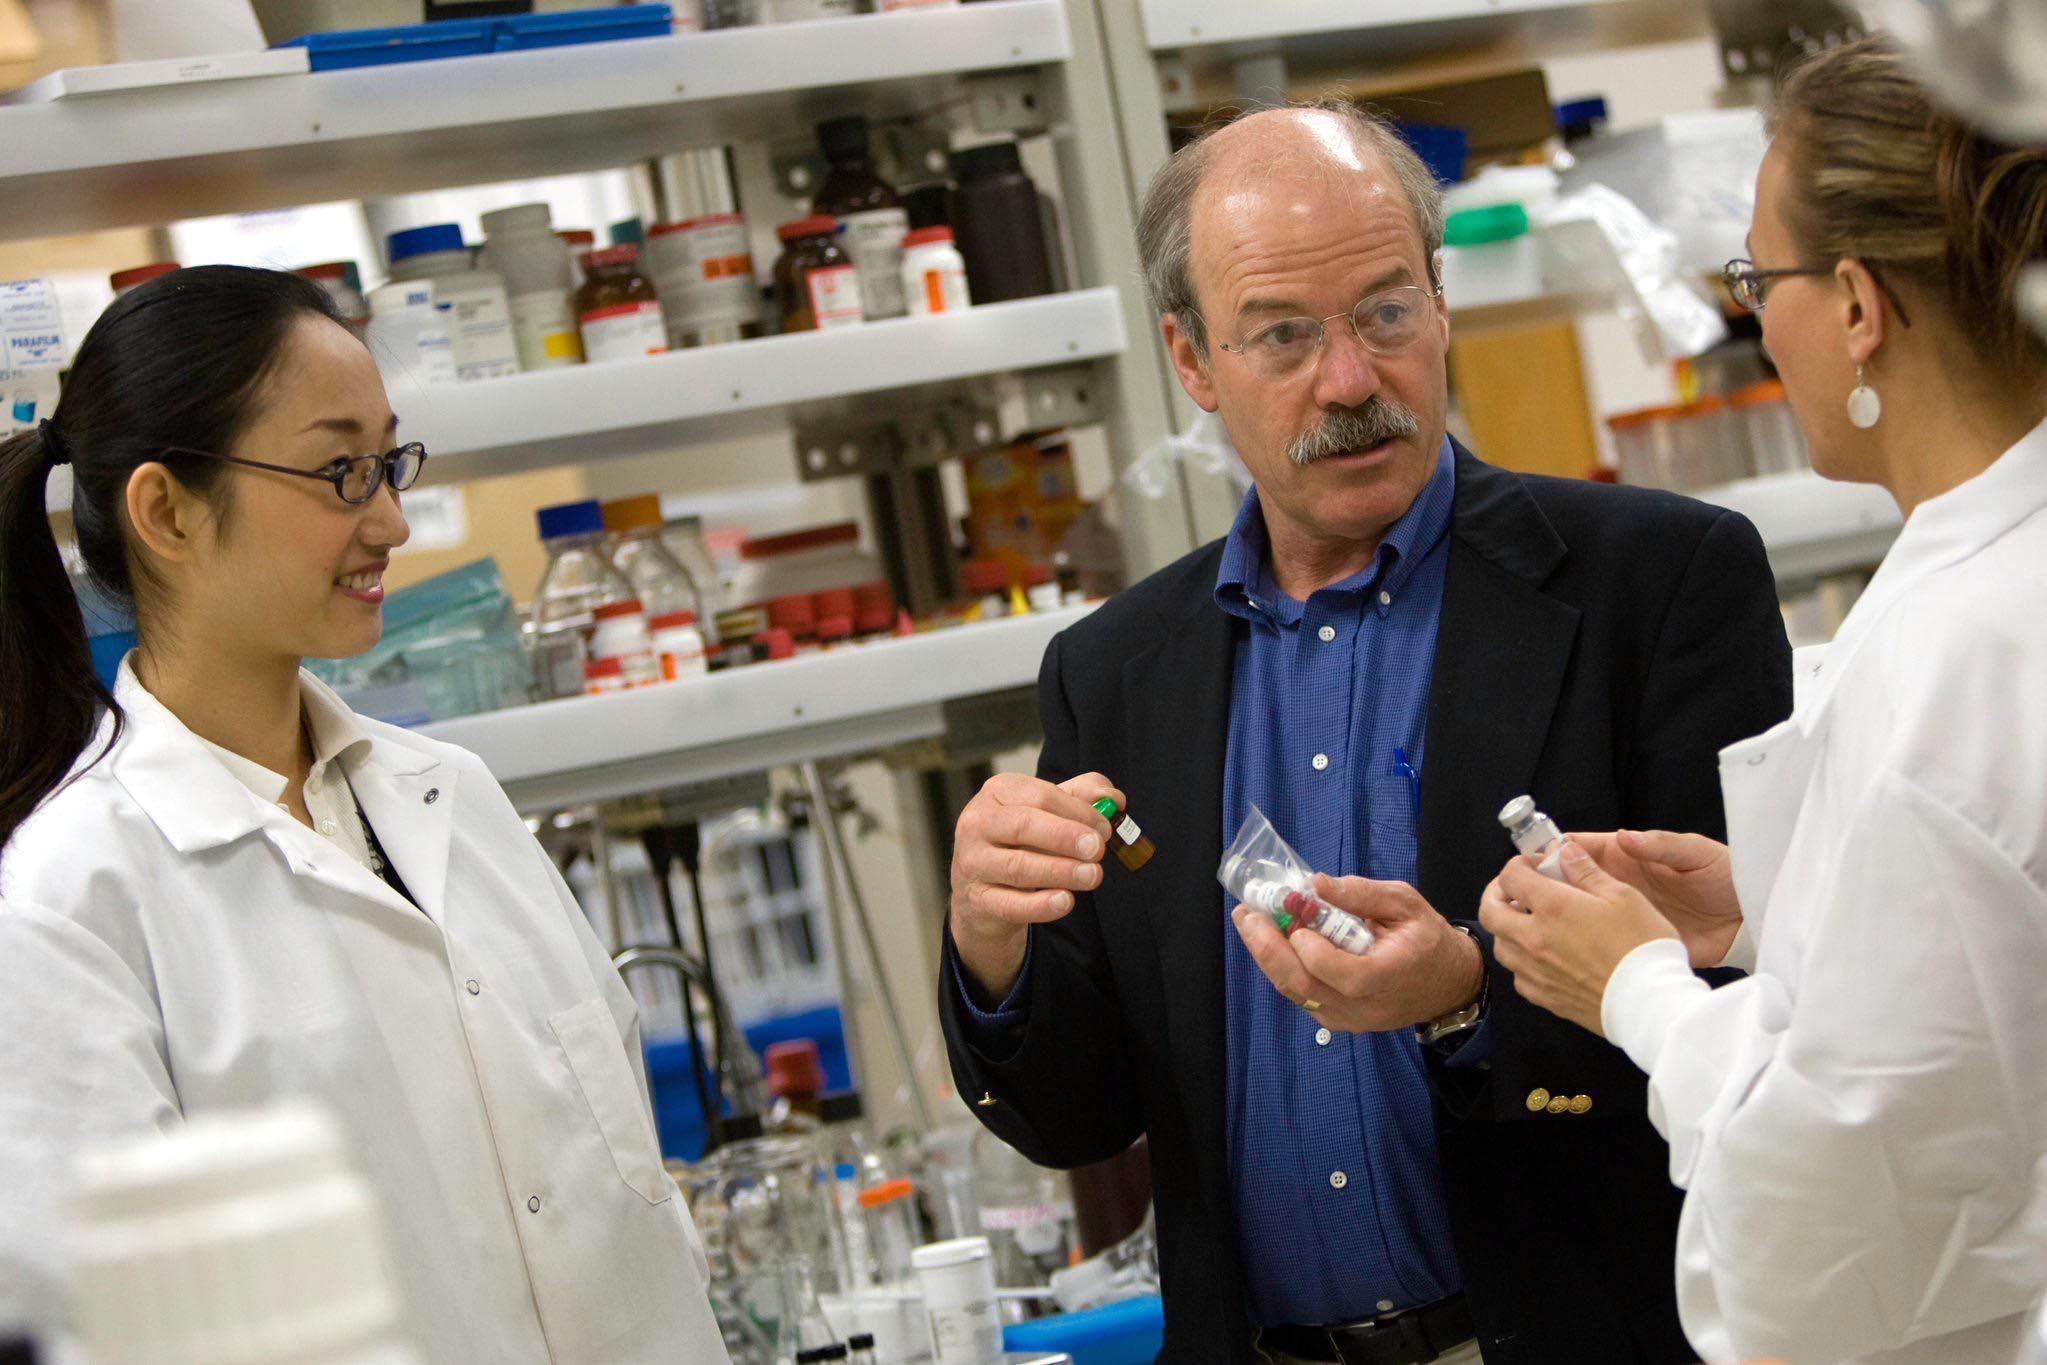 Glenn Prestwich in lab with other researchers